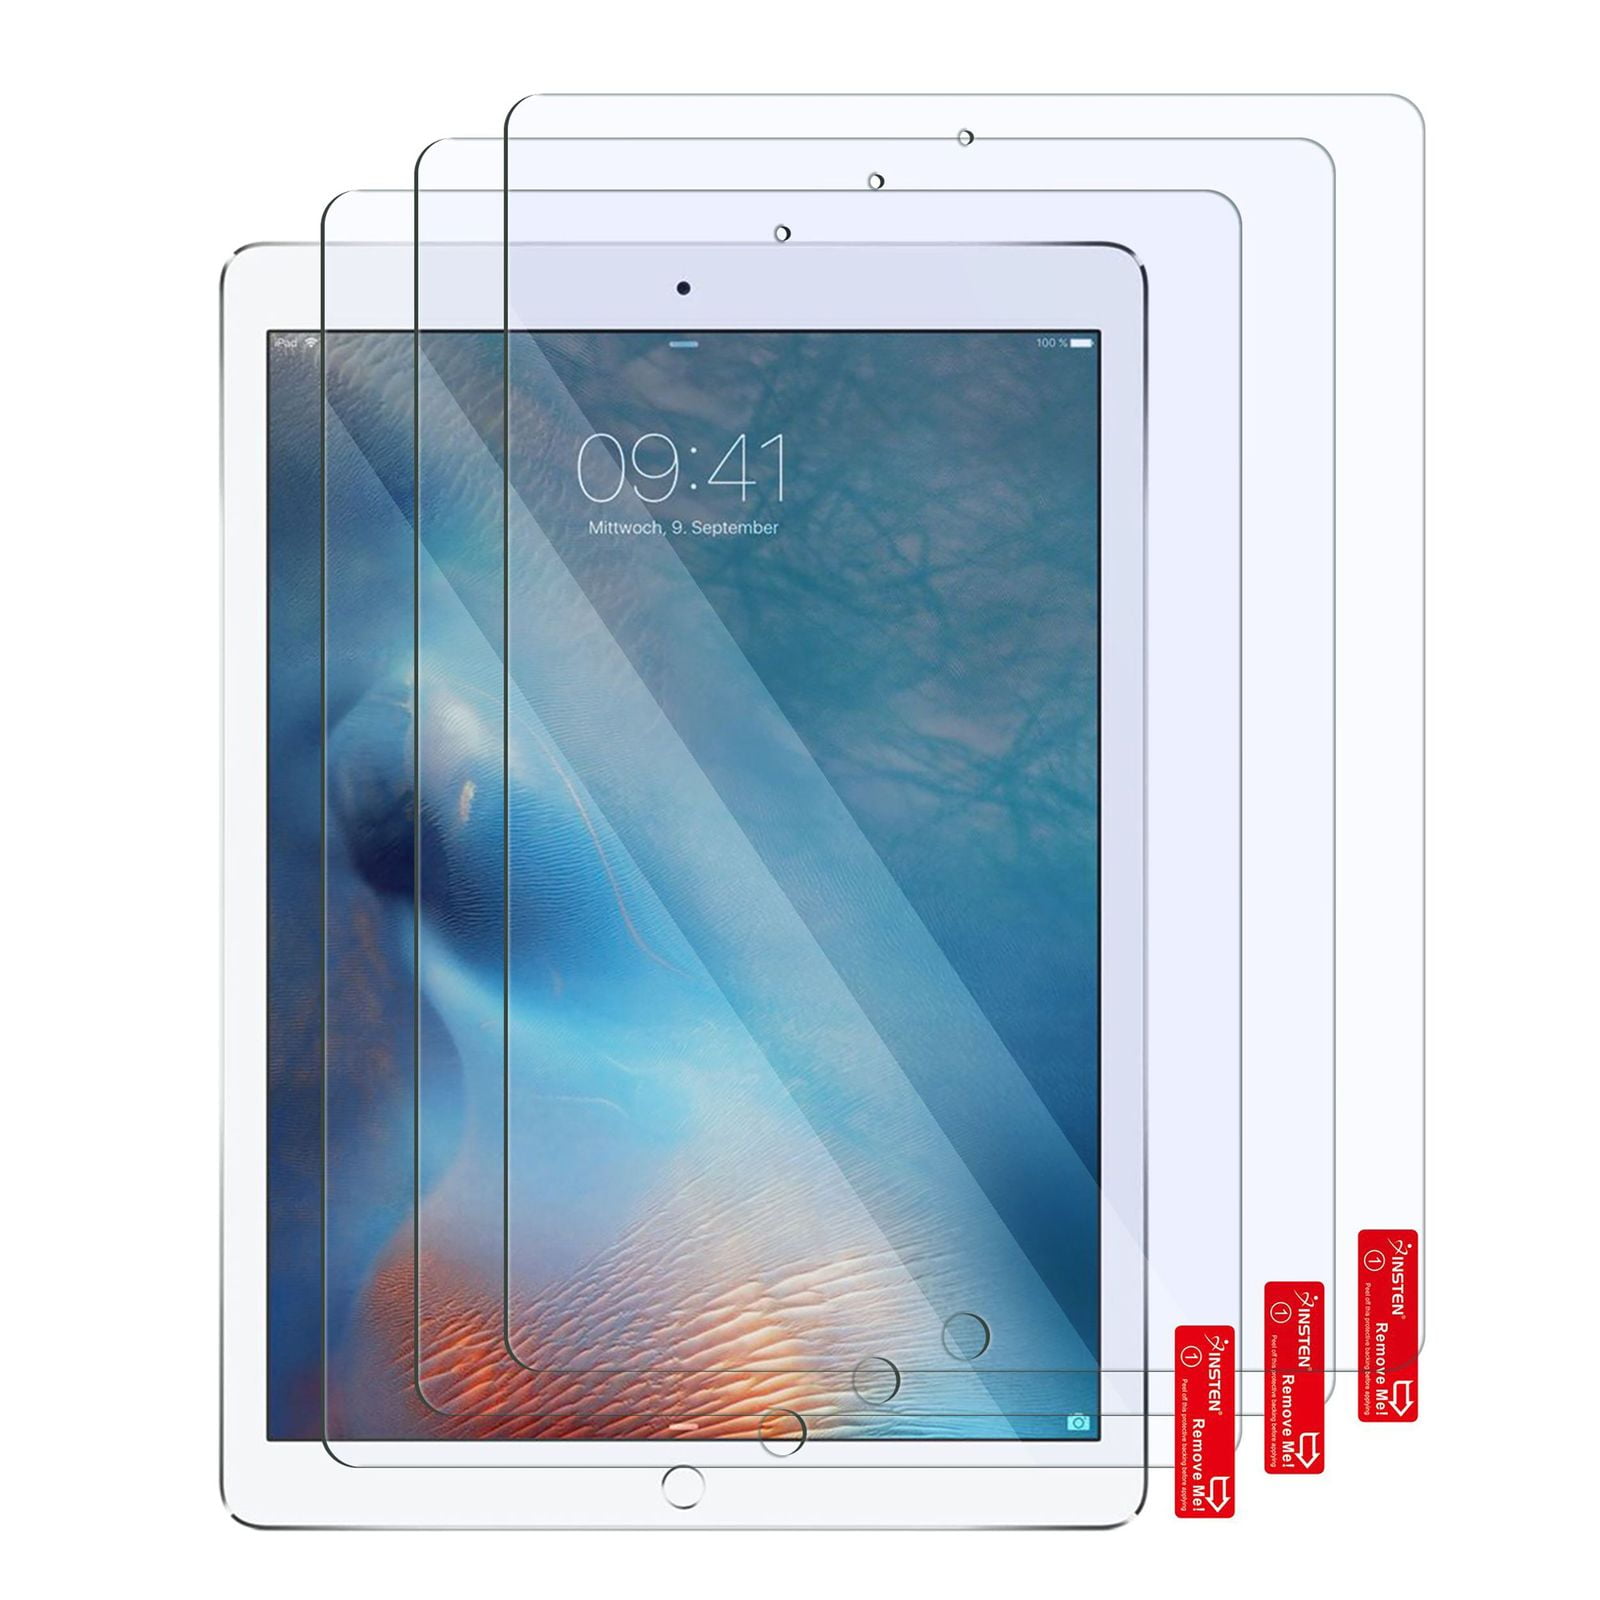 3x Anti Glare Screen Protector for Apple New iPad 3rd Generation 3G 4G LTE WiFi 